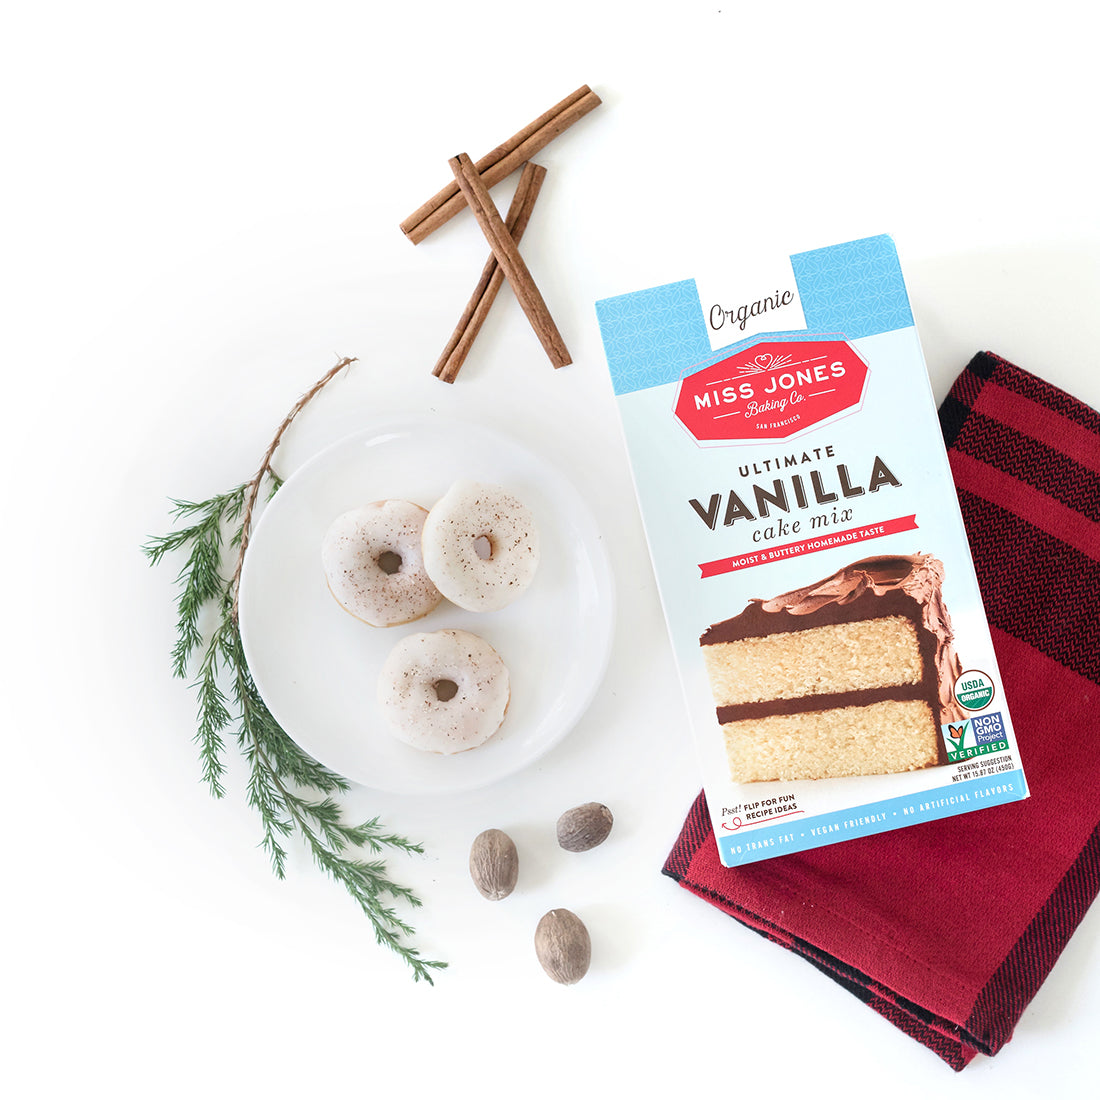 Image of three Miss Jones Baking Co Easy Holiday Eggnog Mini Donuts on a white plate next to a box of Miss Jones Vanilla Cake Mix, three nutmegs, three cinnamon sticks and a sprig of a conifer branch